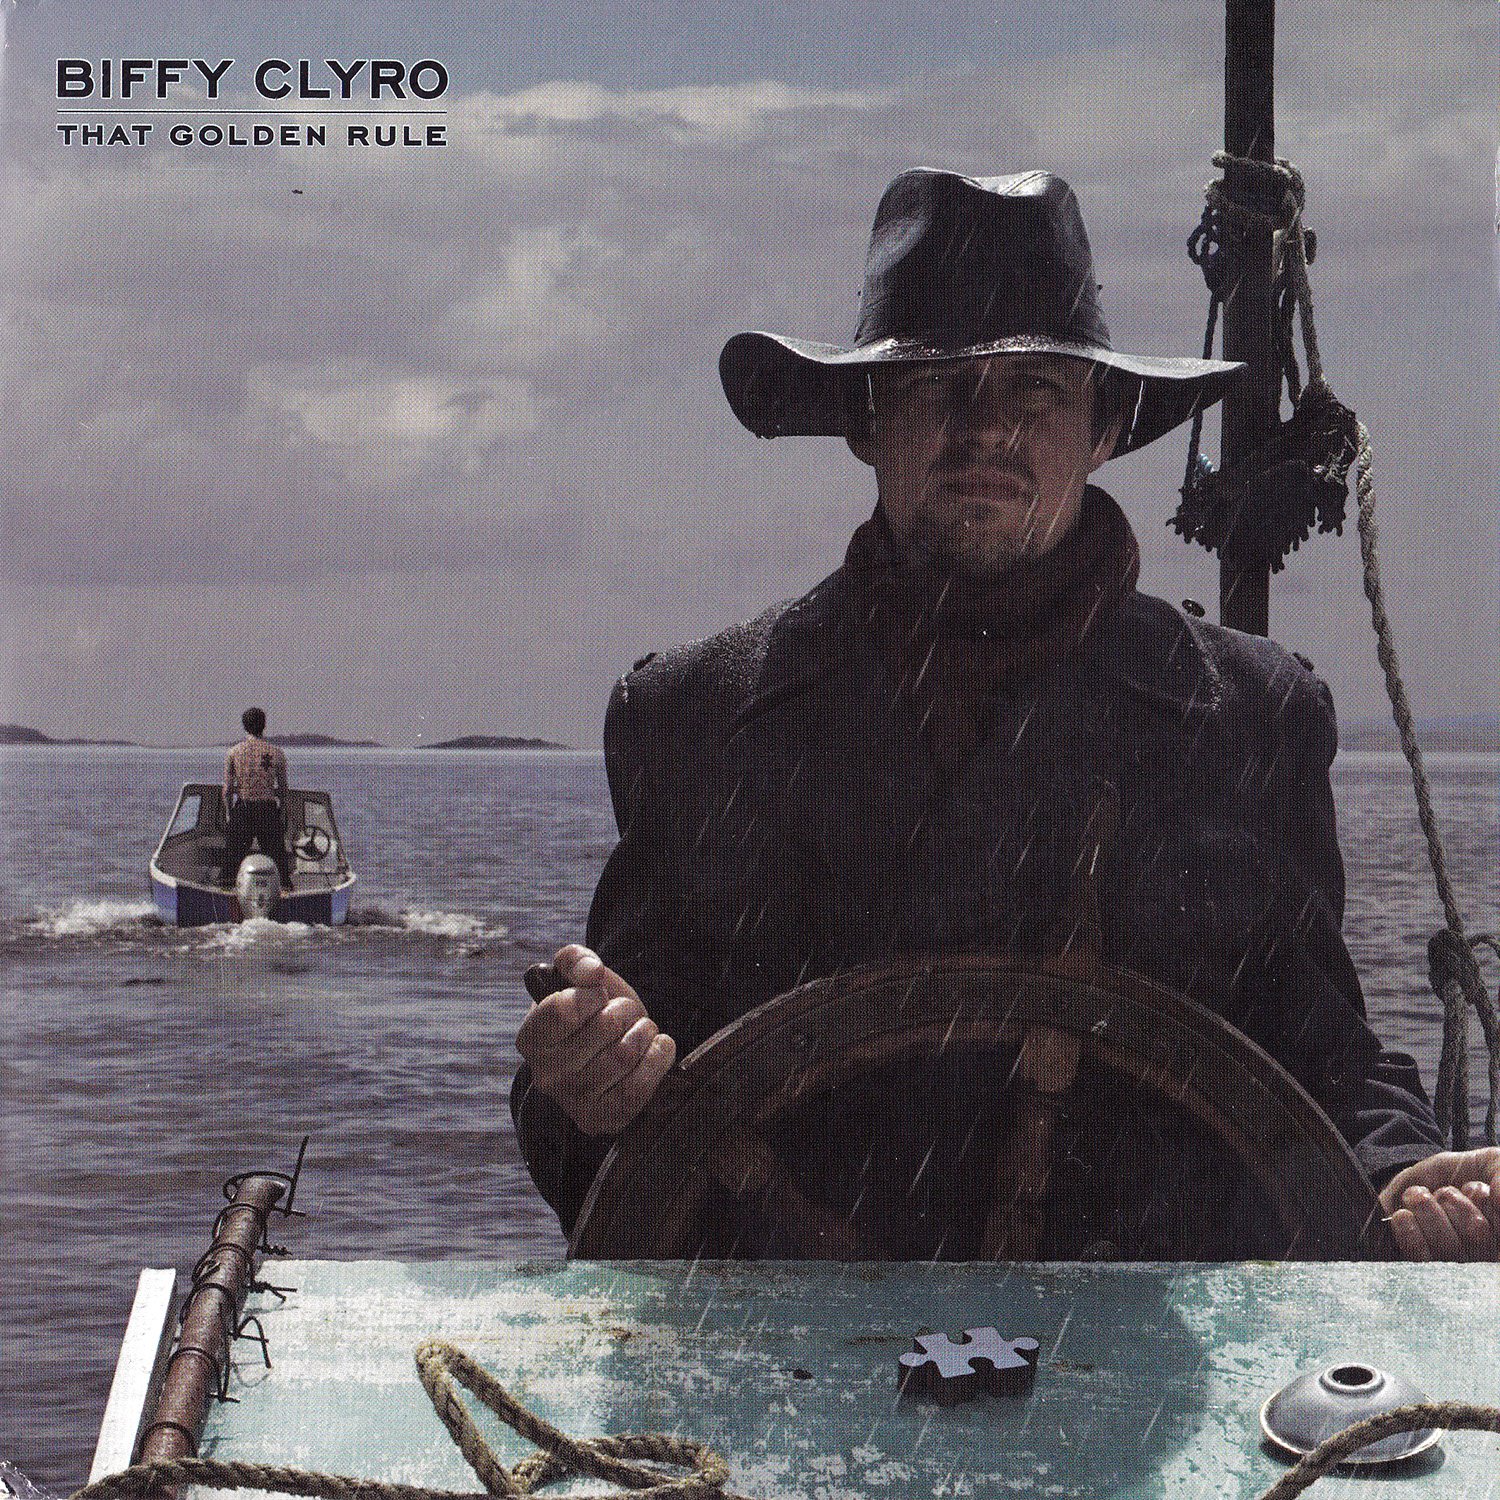 Biffy Clyro / That Golden Rule (Single Cover)